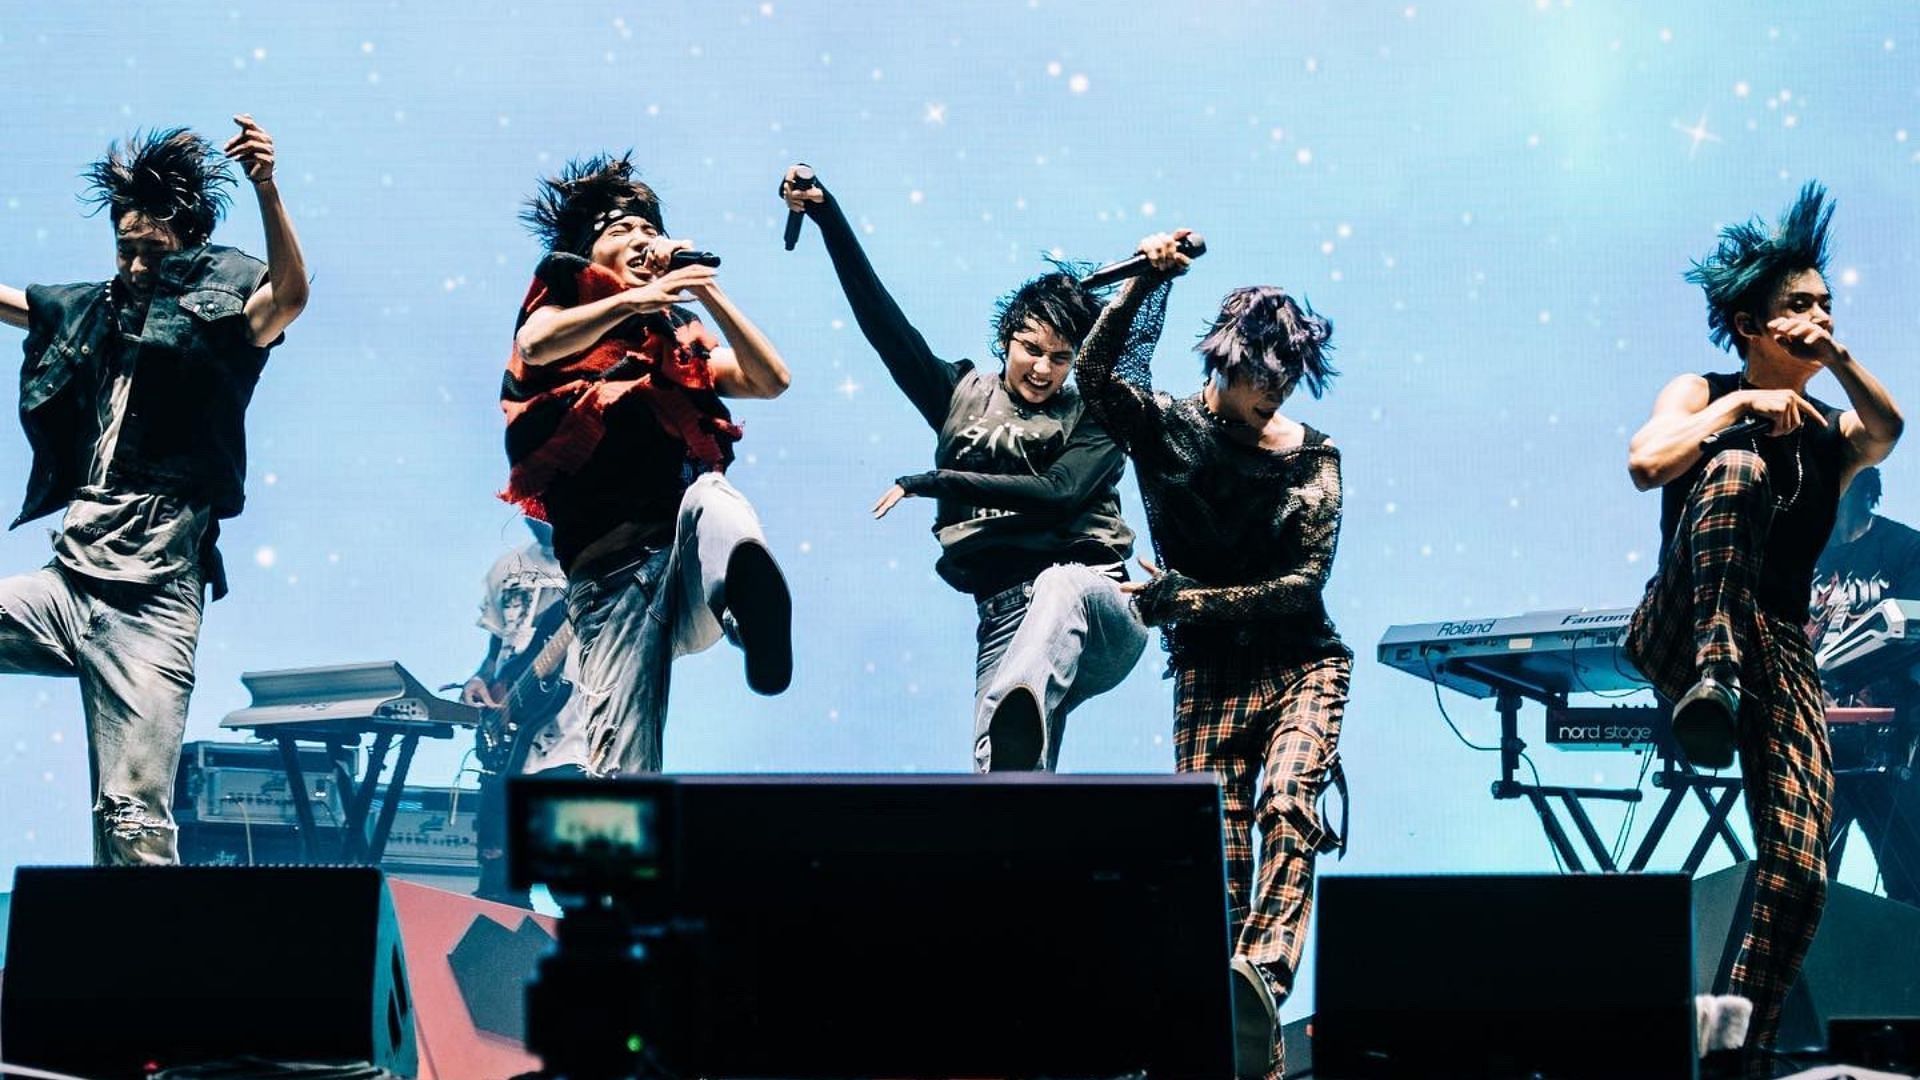 TXT at Lollapalooza 2022 (Twitter/@The_CameraLady)